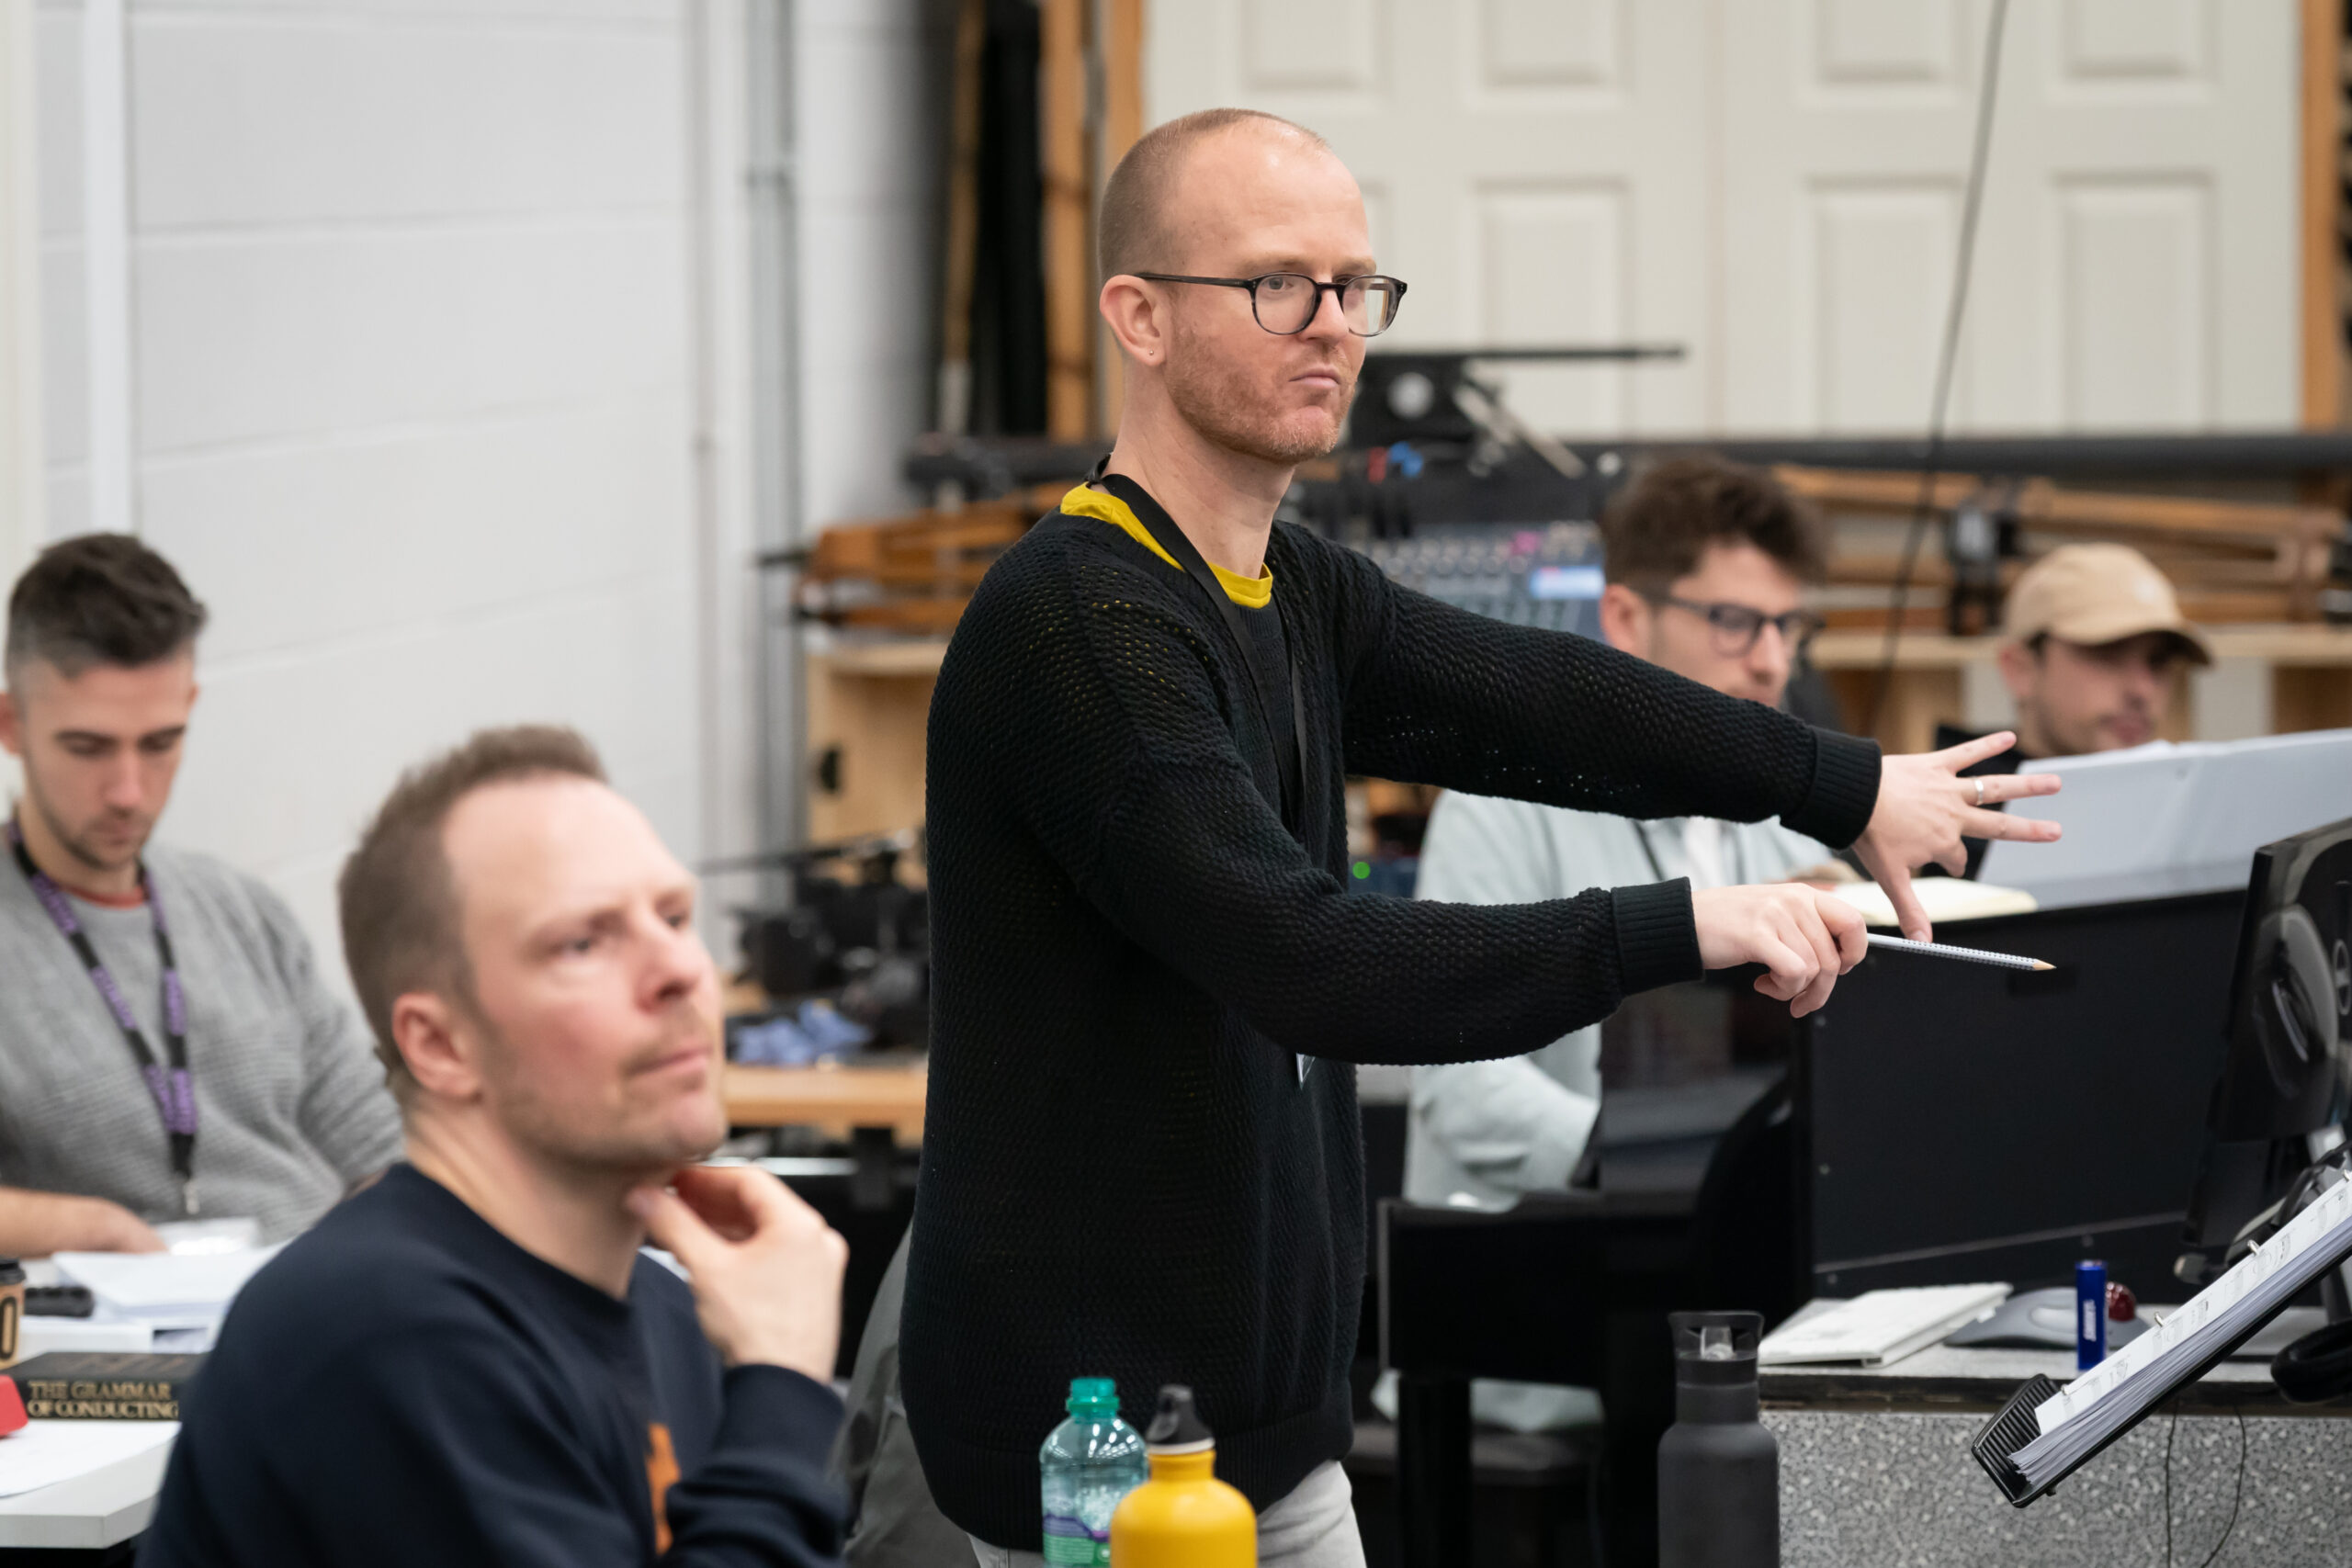 (L-R) George Strickland (Rehearsal Pianist), Nikolai Foster (Director), Ben van Tienen (Musical Director) and Tom Slade (Assistant Musical Director)